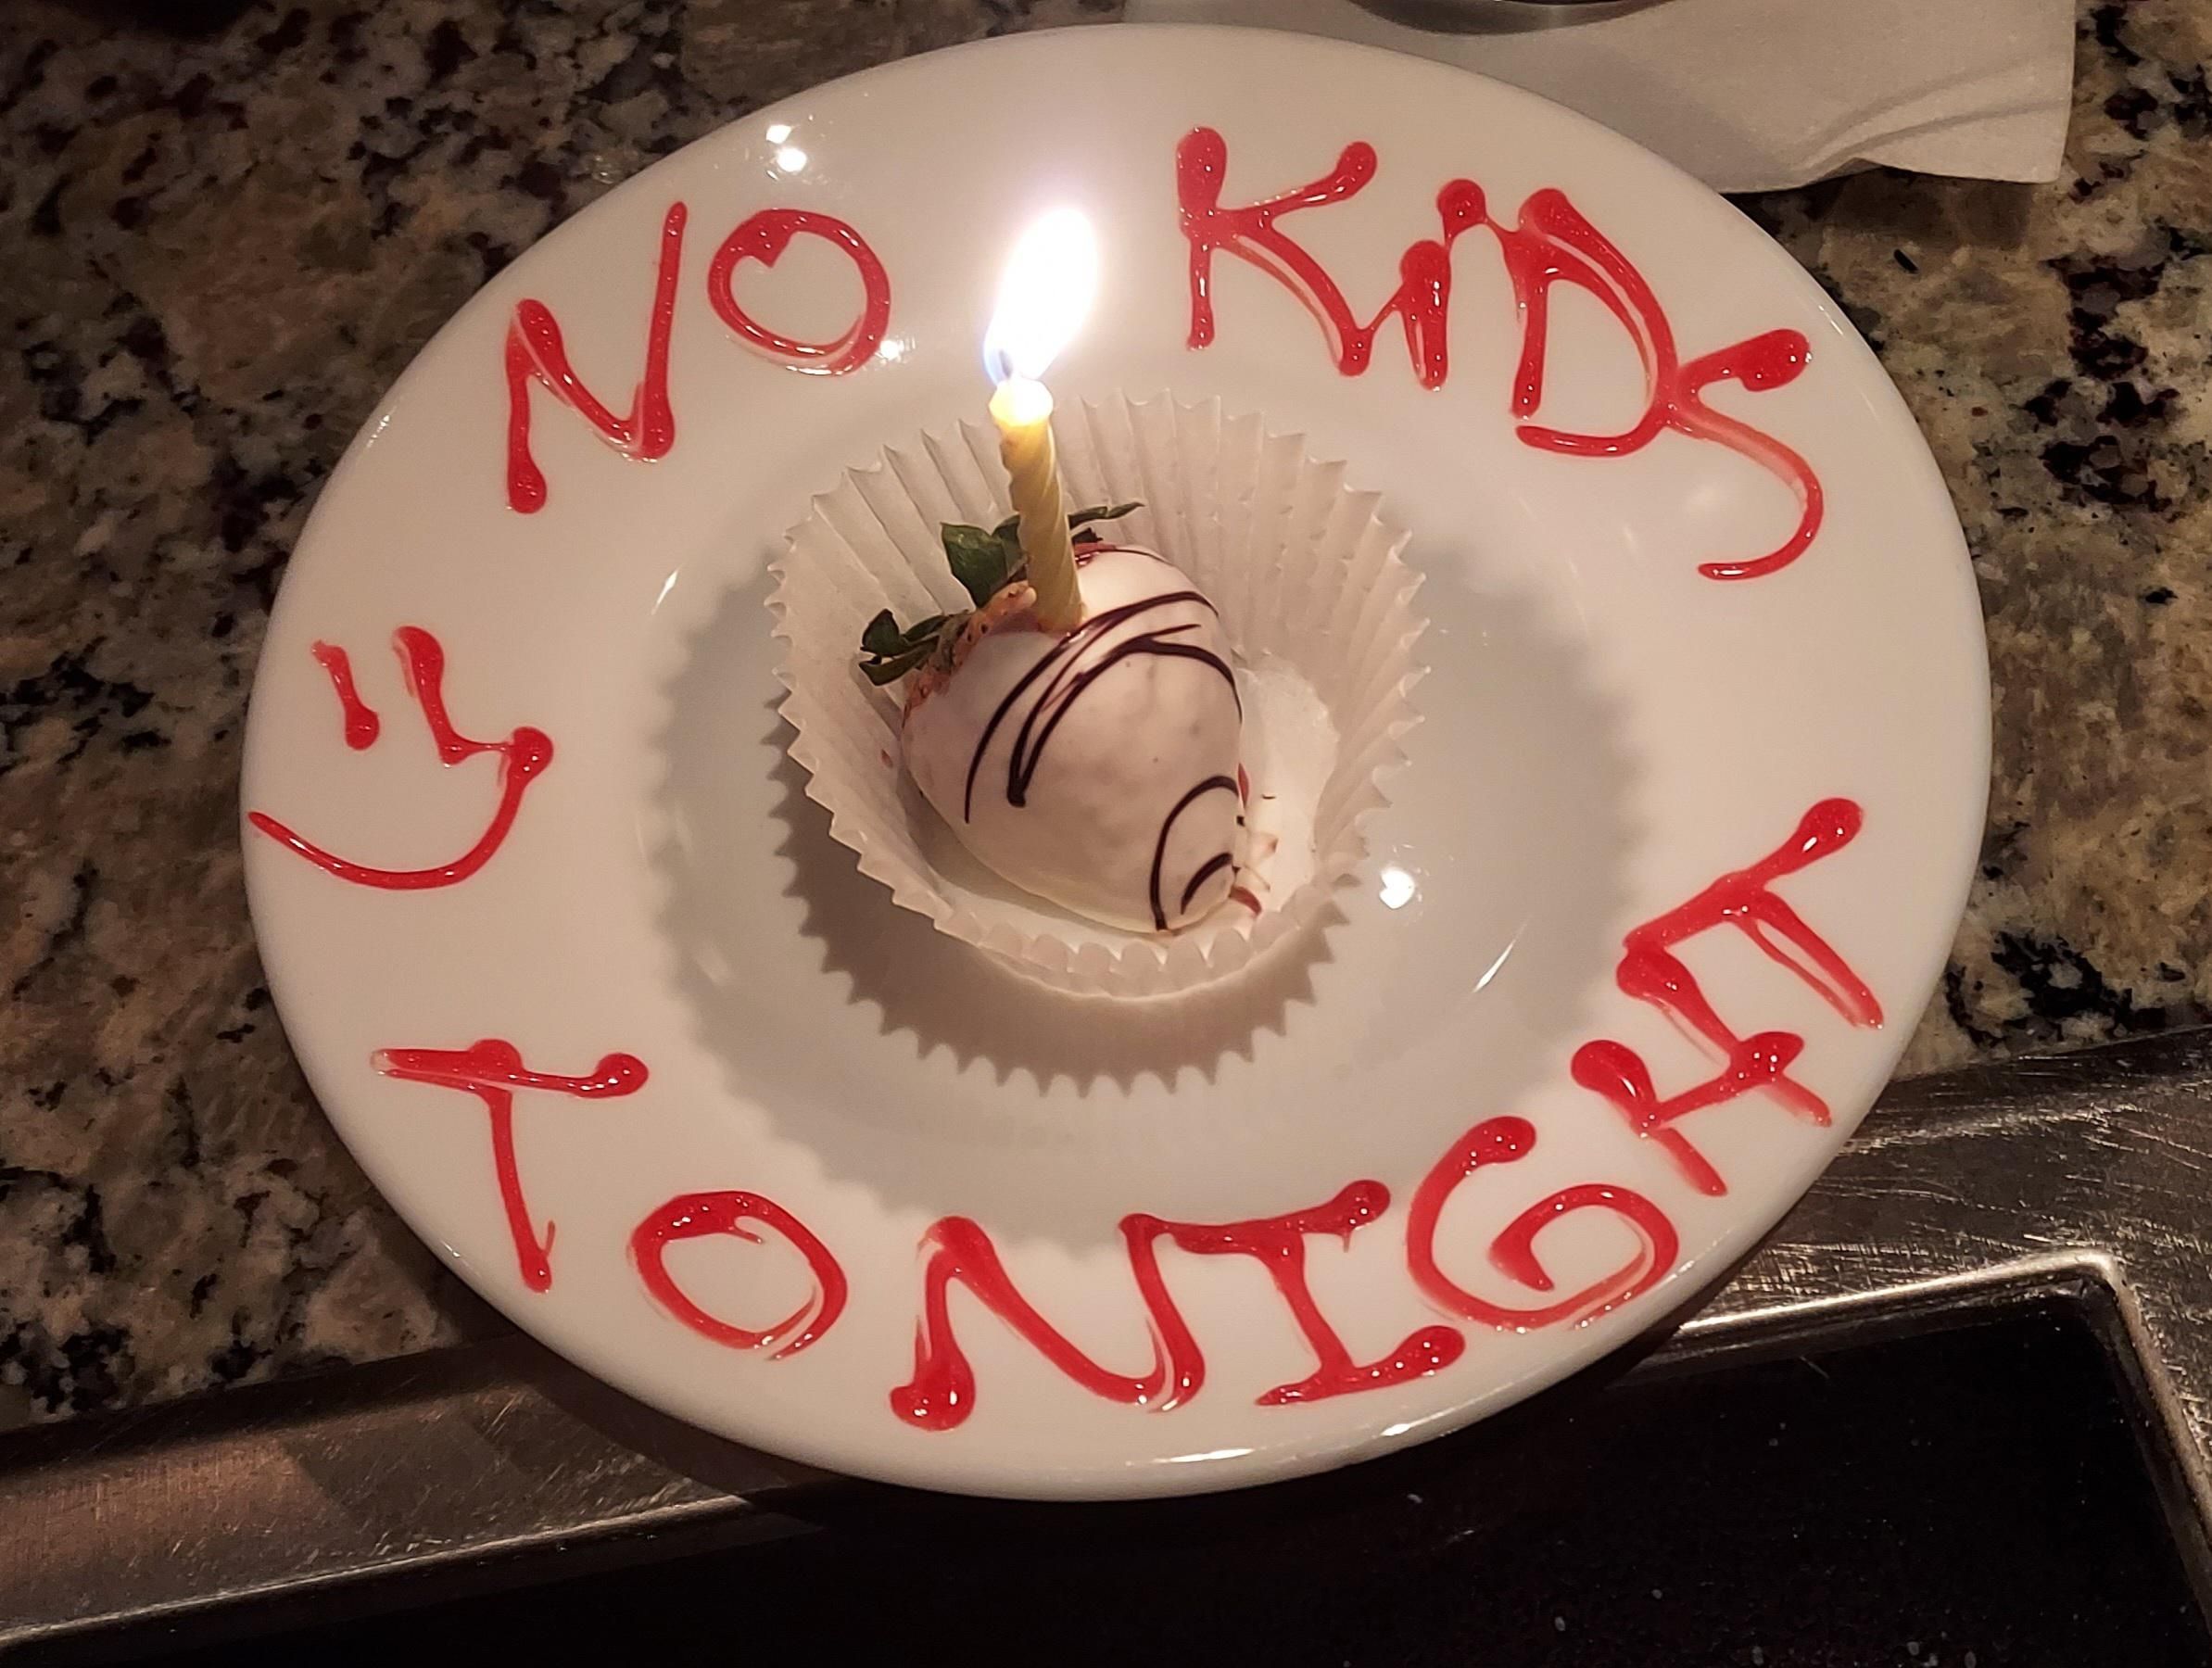 Restaurant asked if we were celebrating anything special.